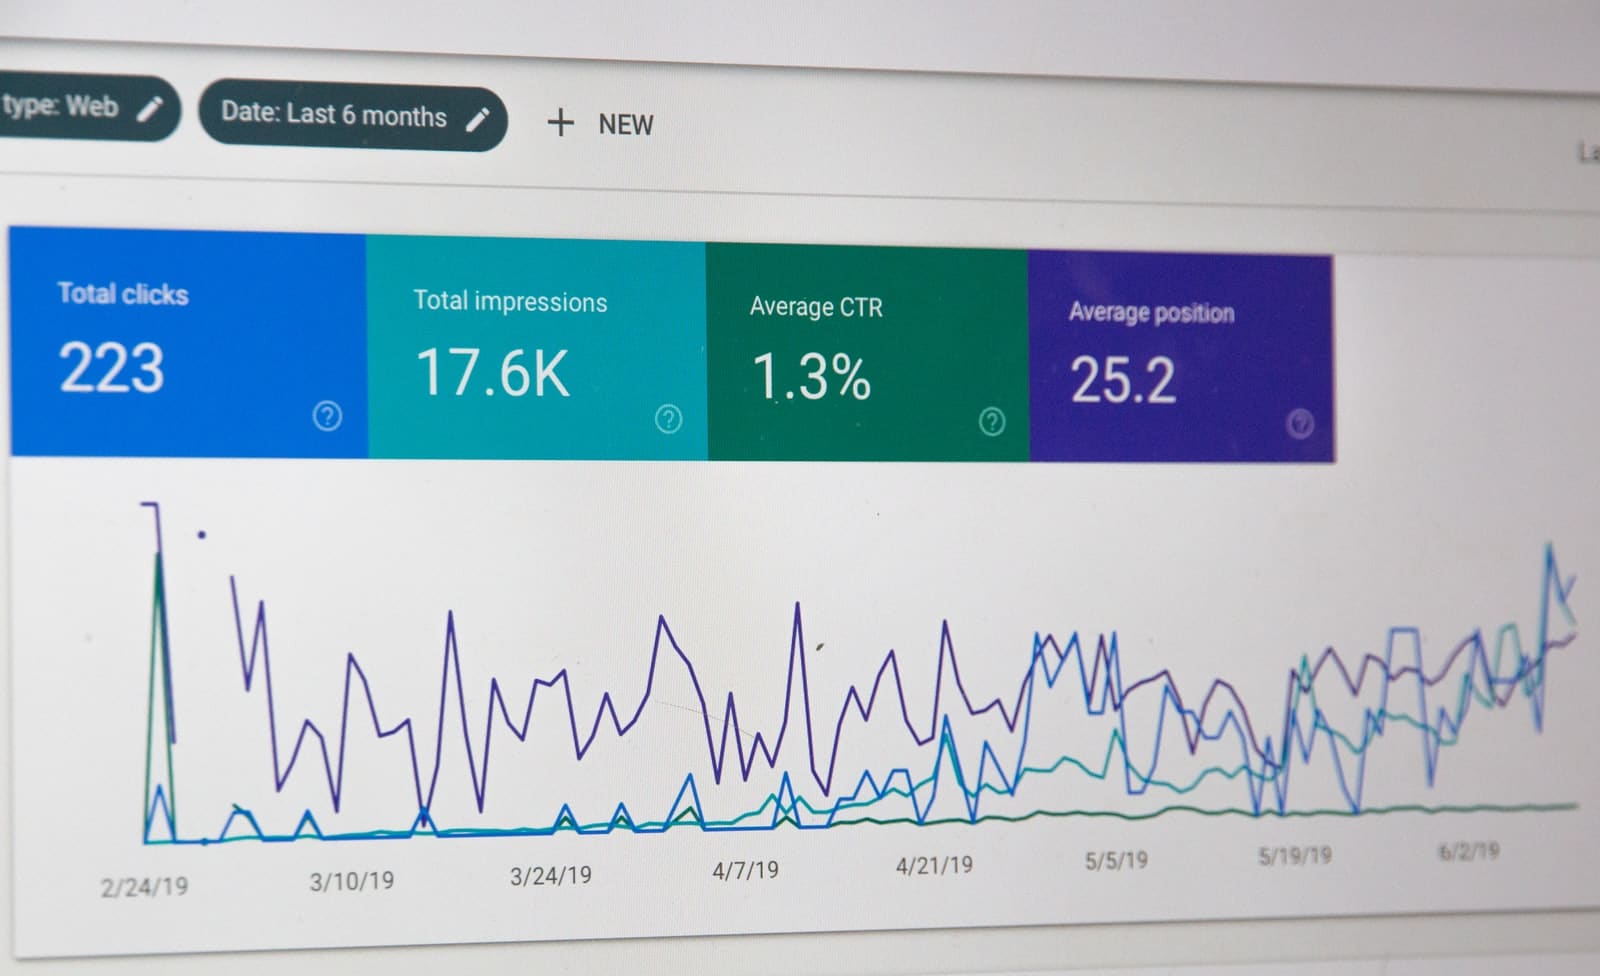 The 5 Things to Review on Google Analytics & Search Console